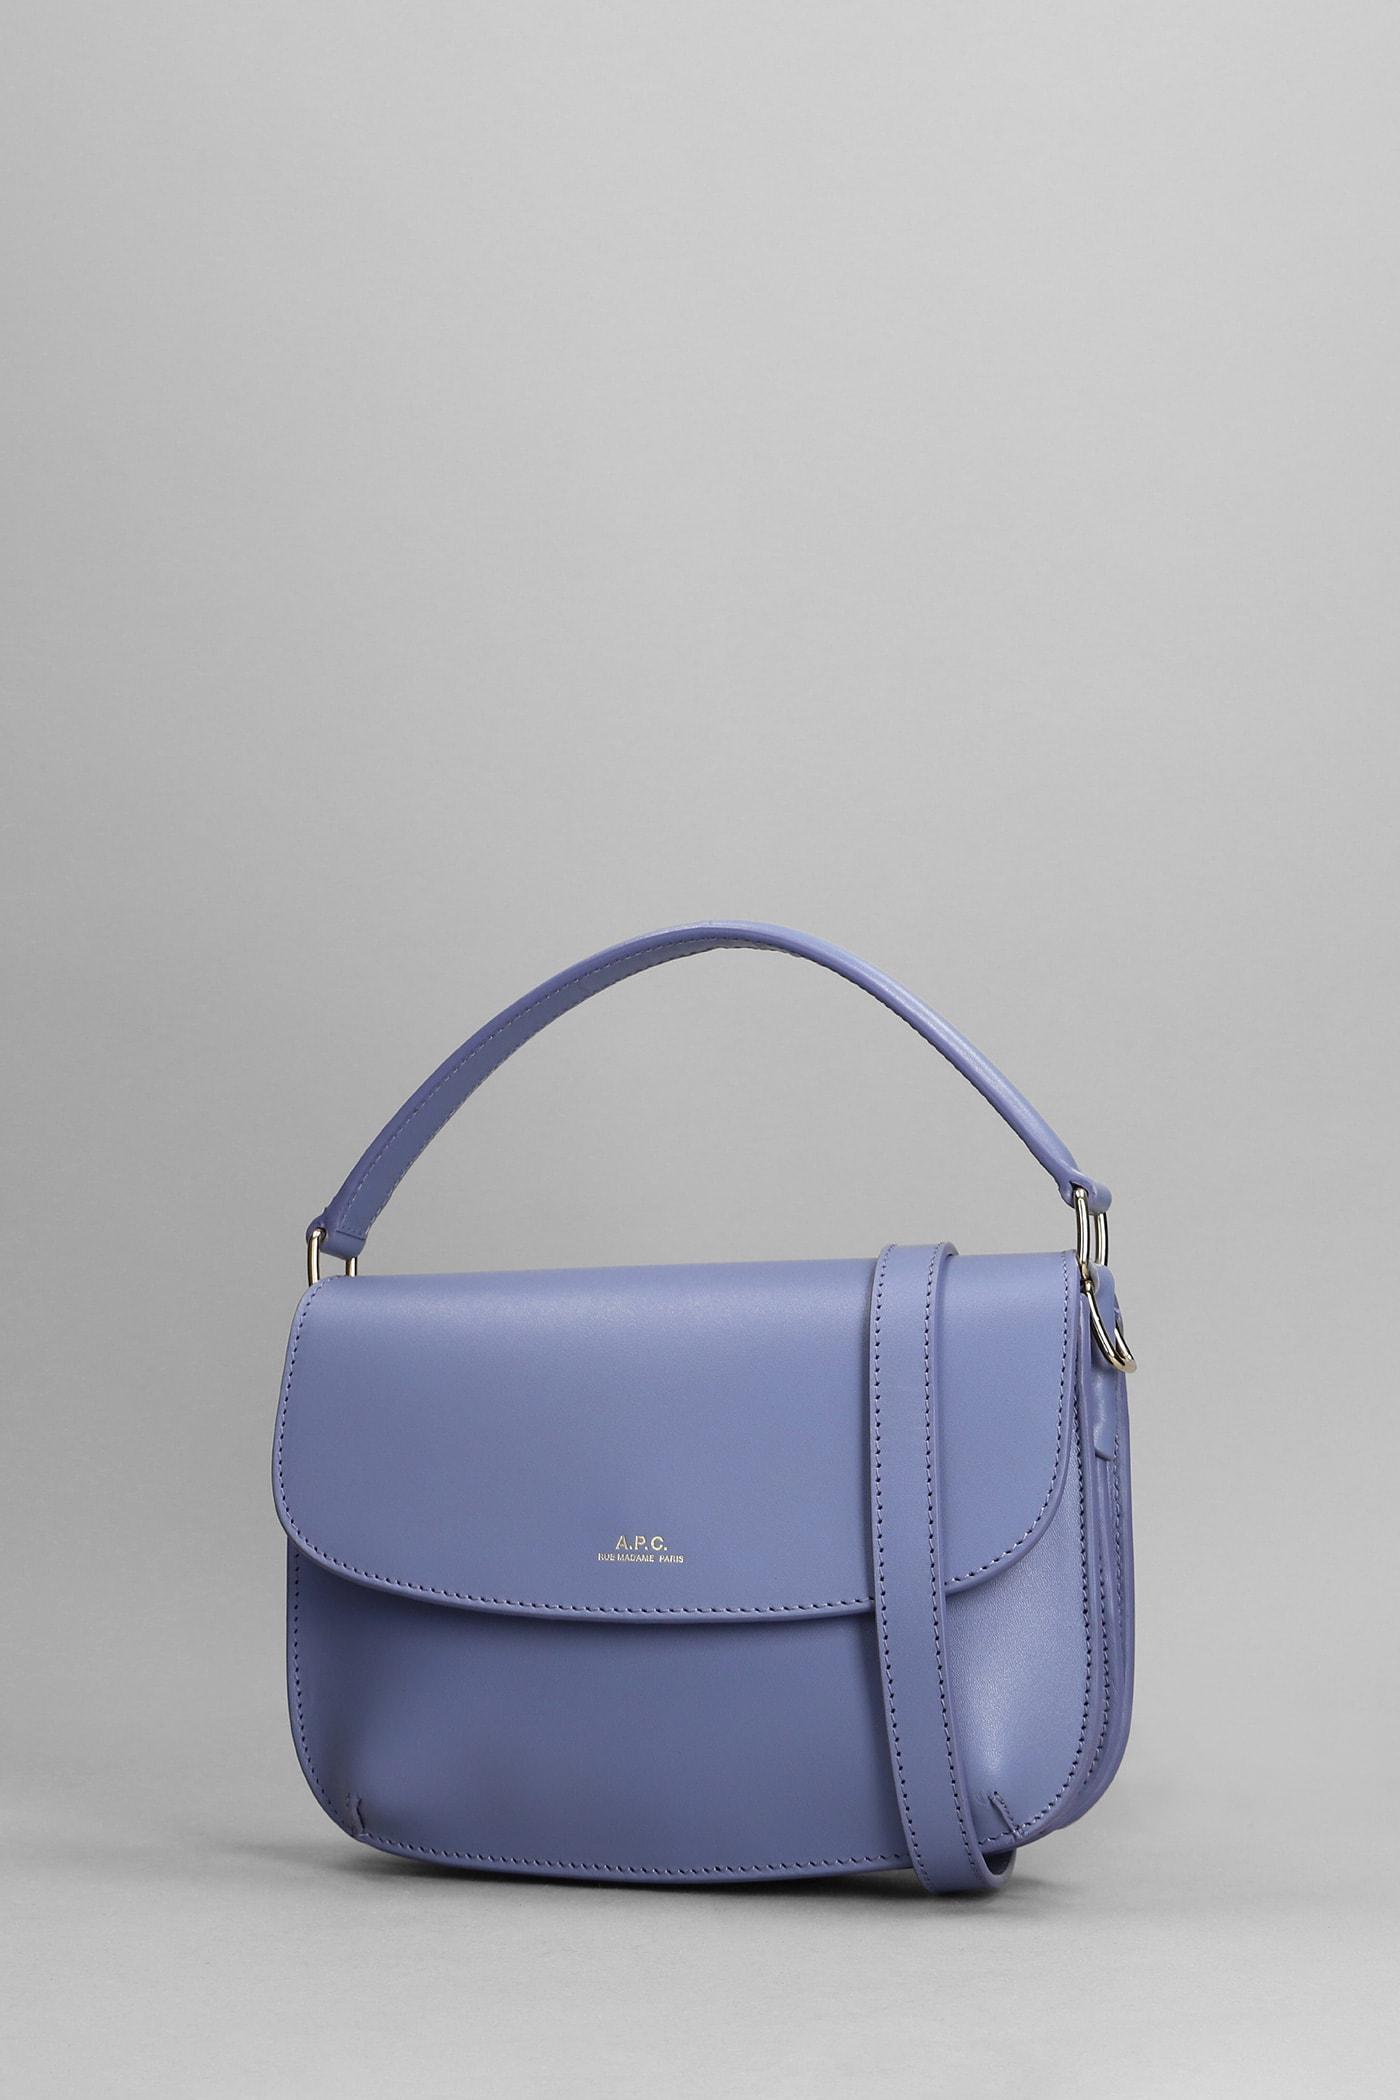 A.P.C. Sarah Hand Bag In Viola Leather in Blue | Lyst